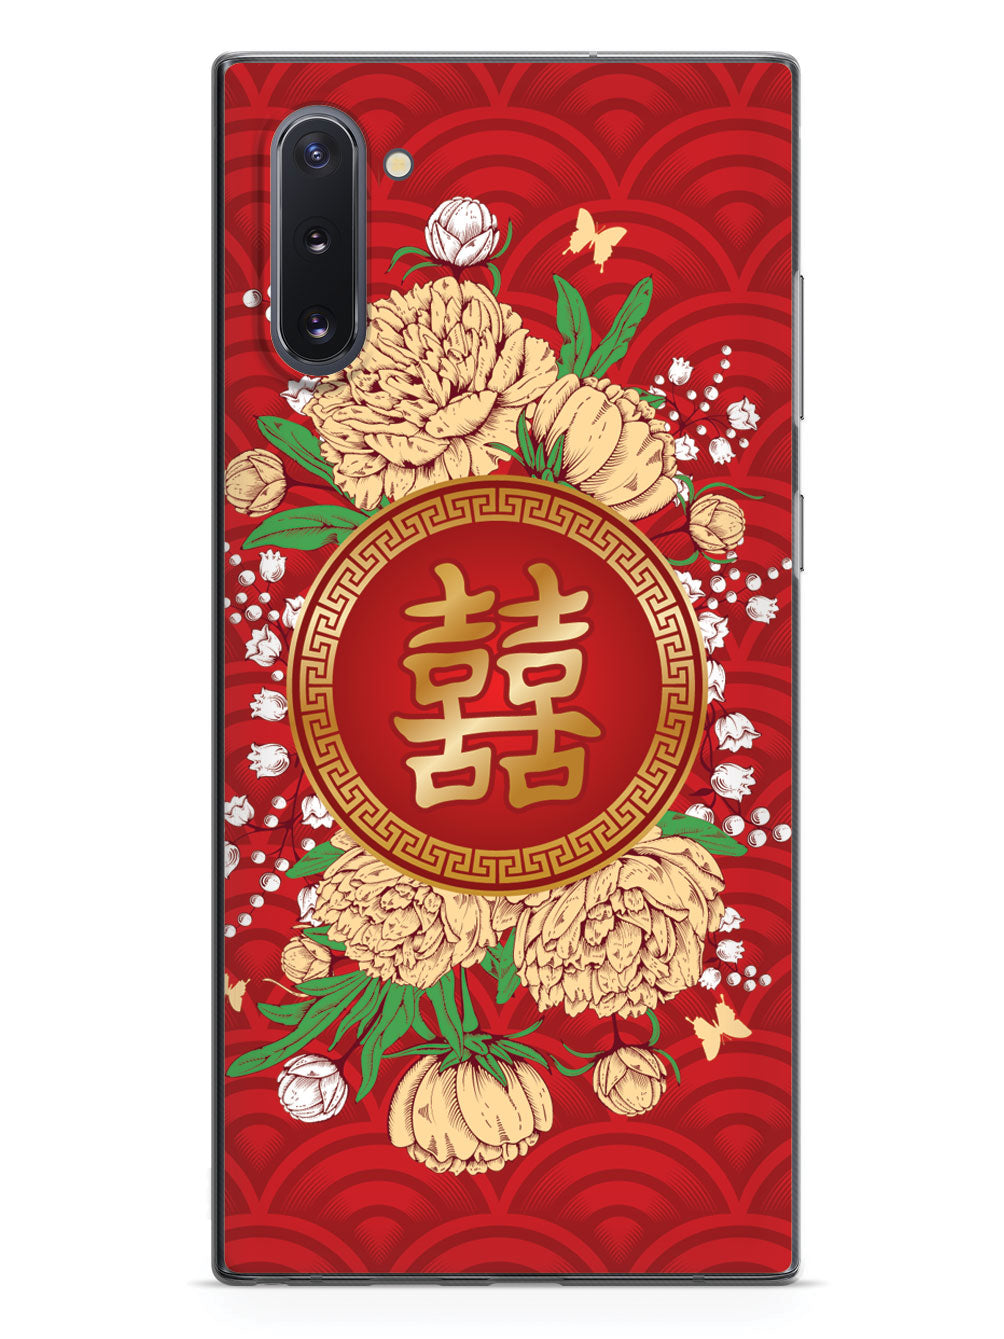 Chinese New Year - Floral Red Envelope - Black Case